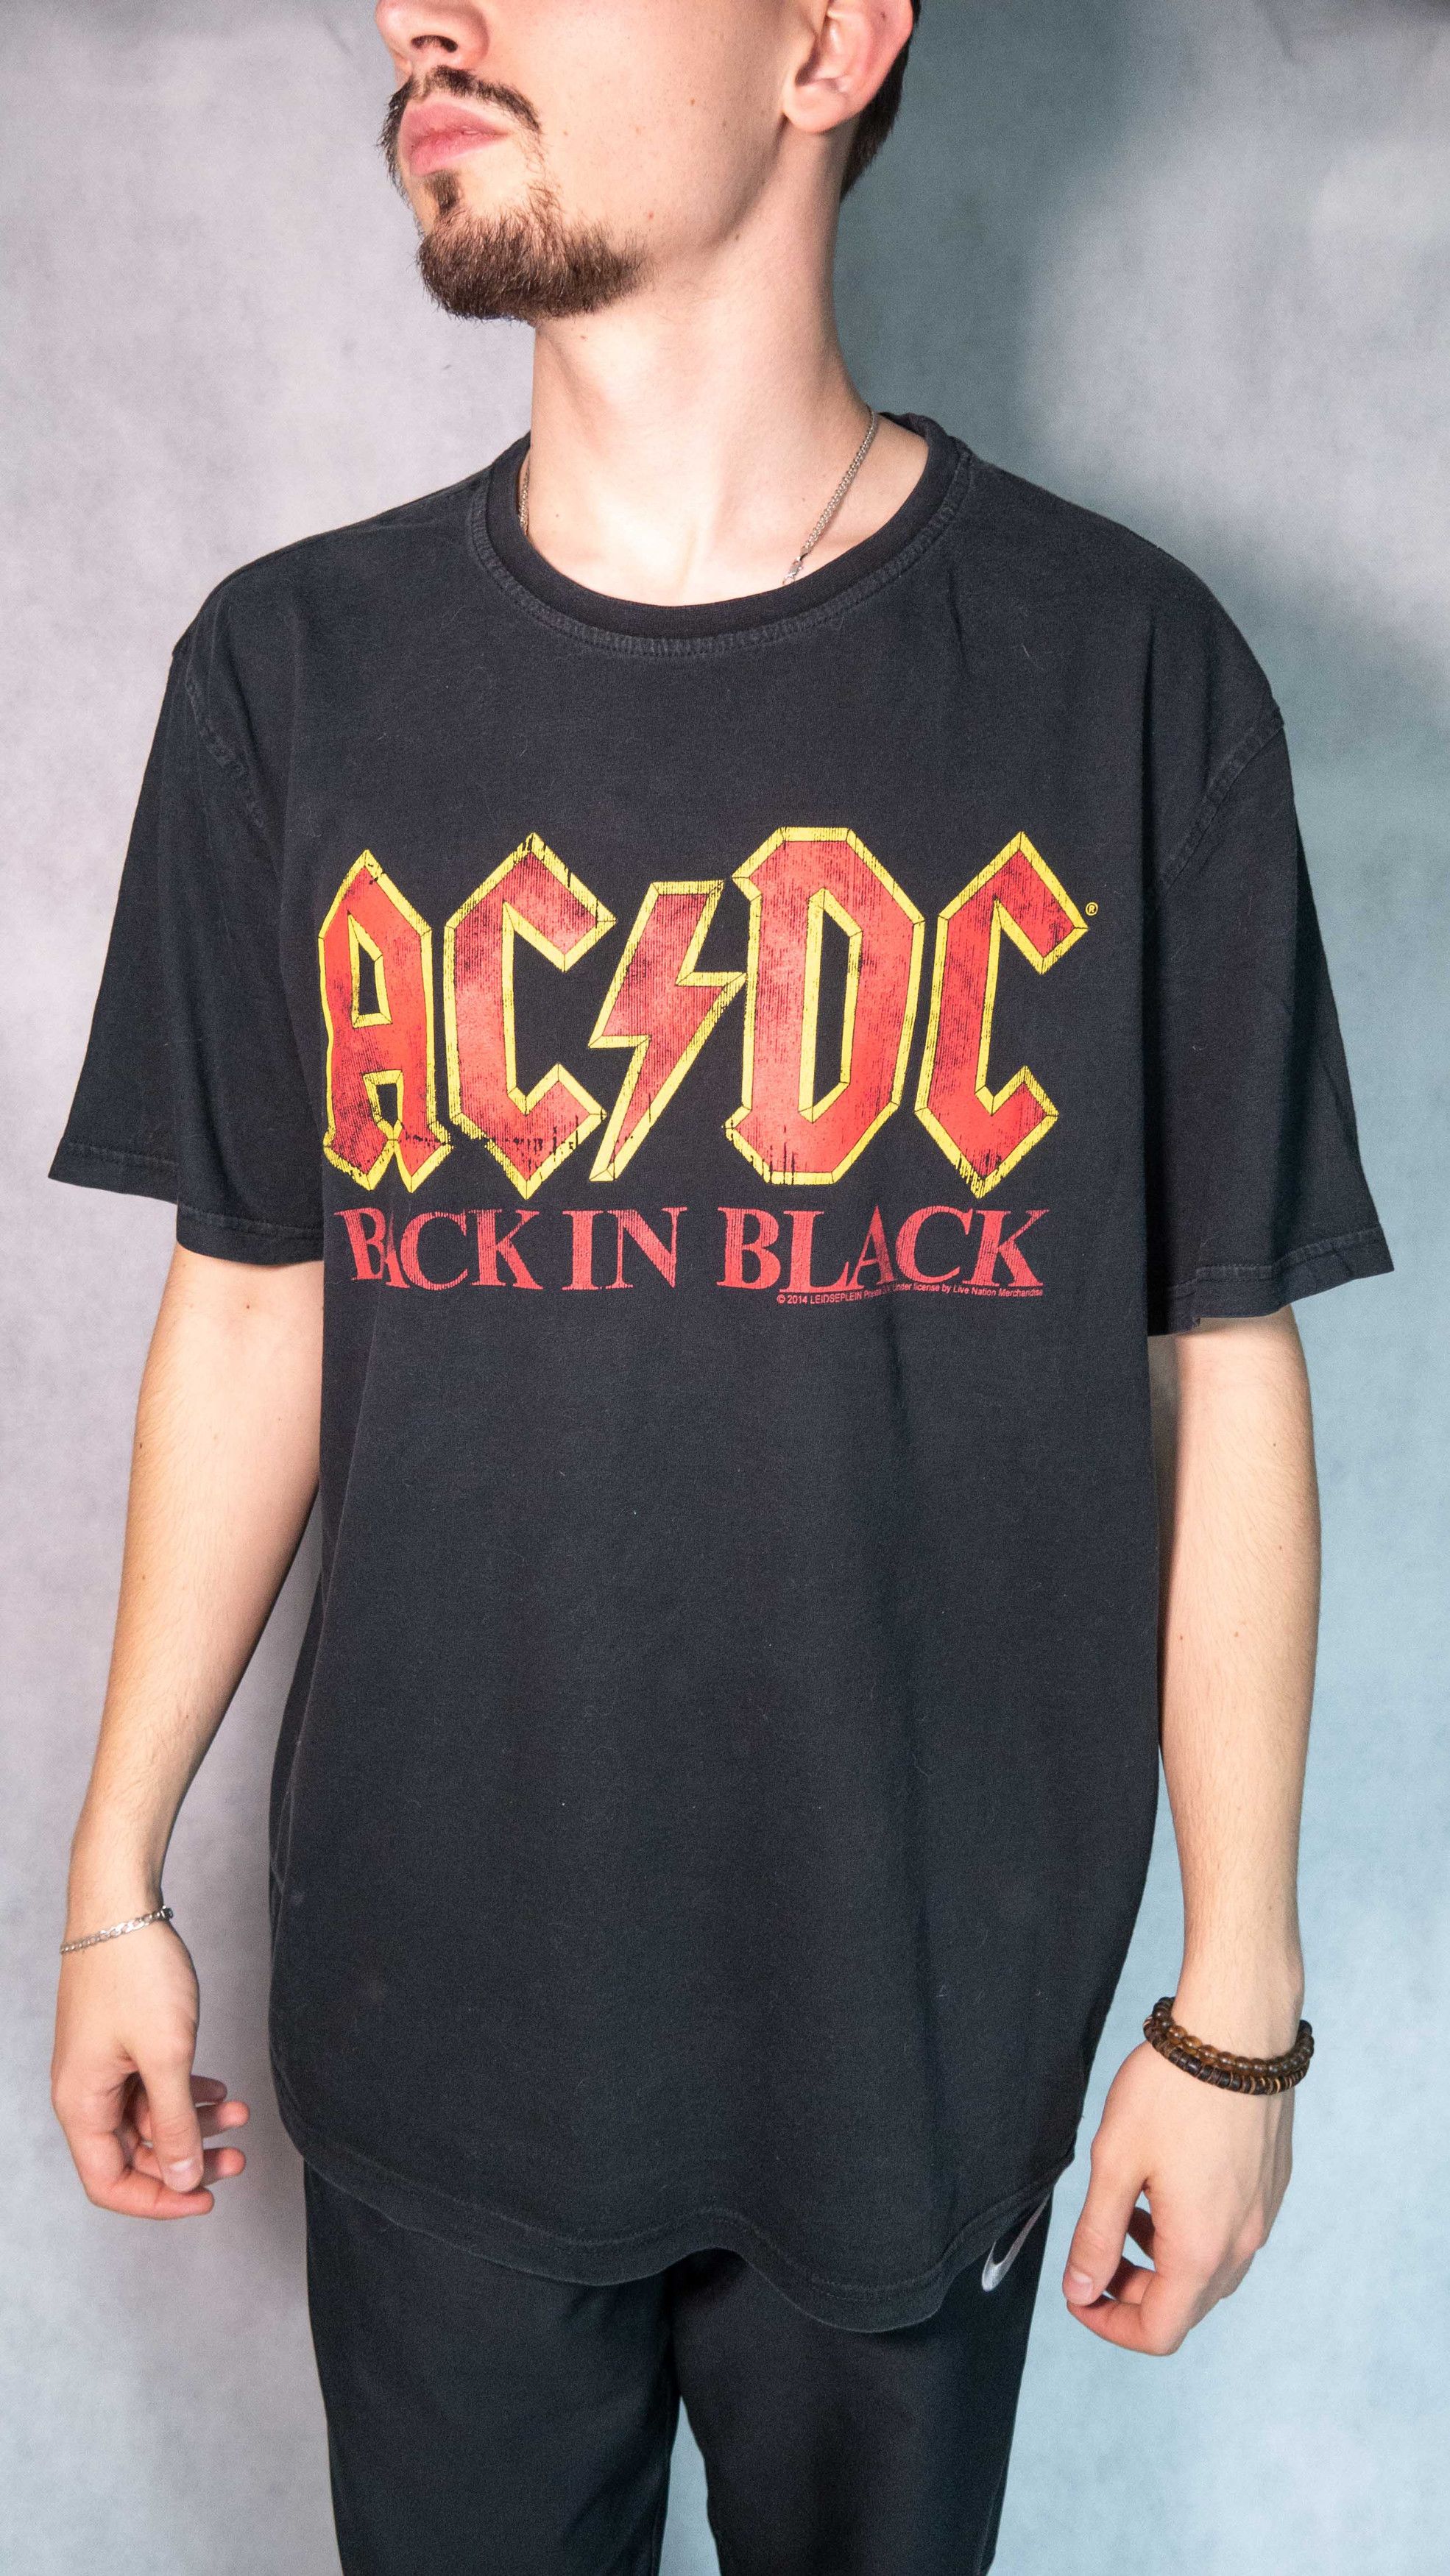 Band Tees Vintage AC/DC back in black Band Tee Rock Retro 90s | Grailed